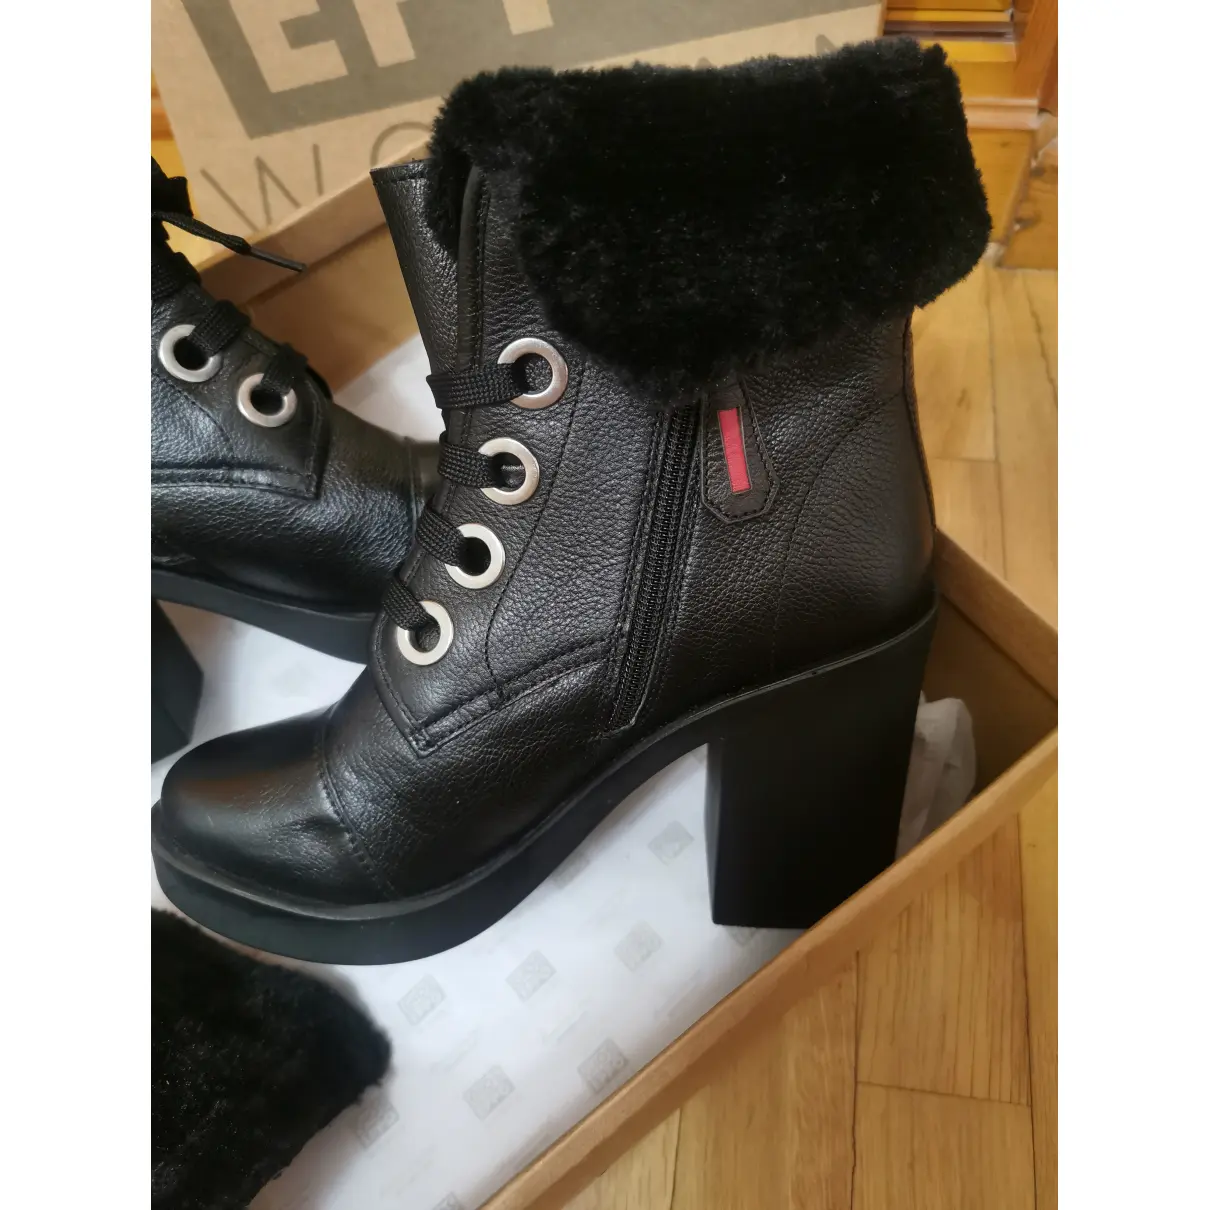 Buy Gioseppo Leather lace up boots online